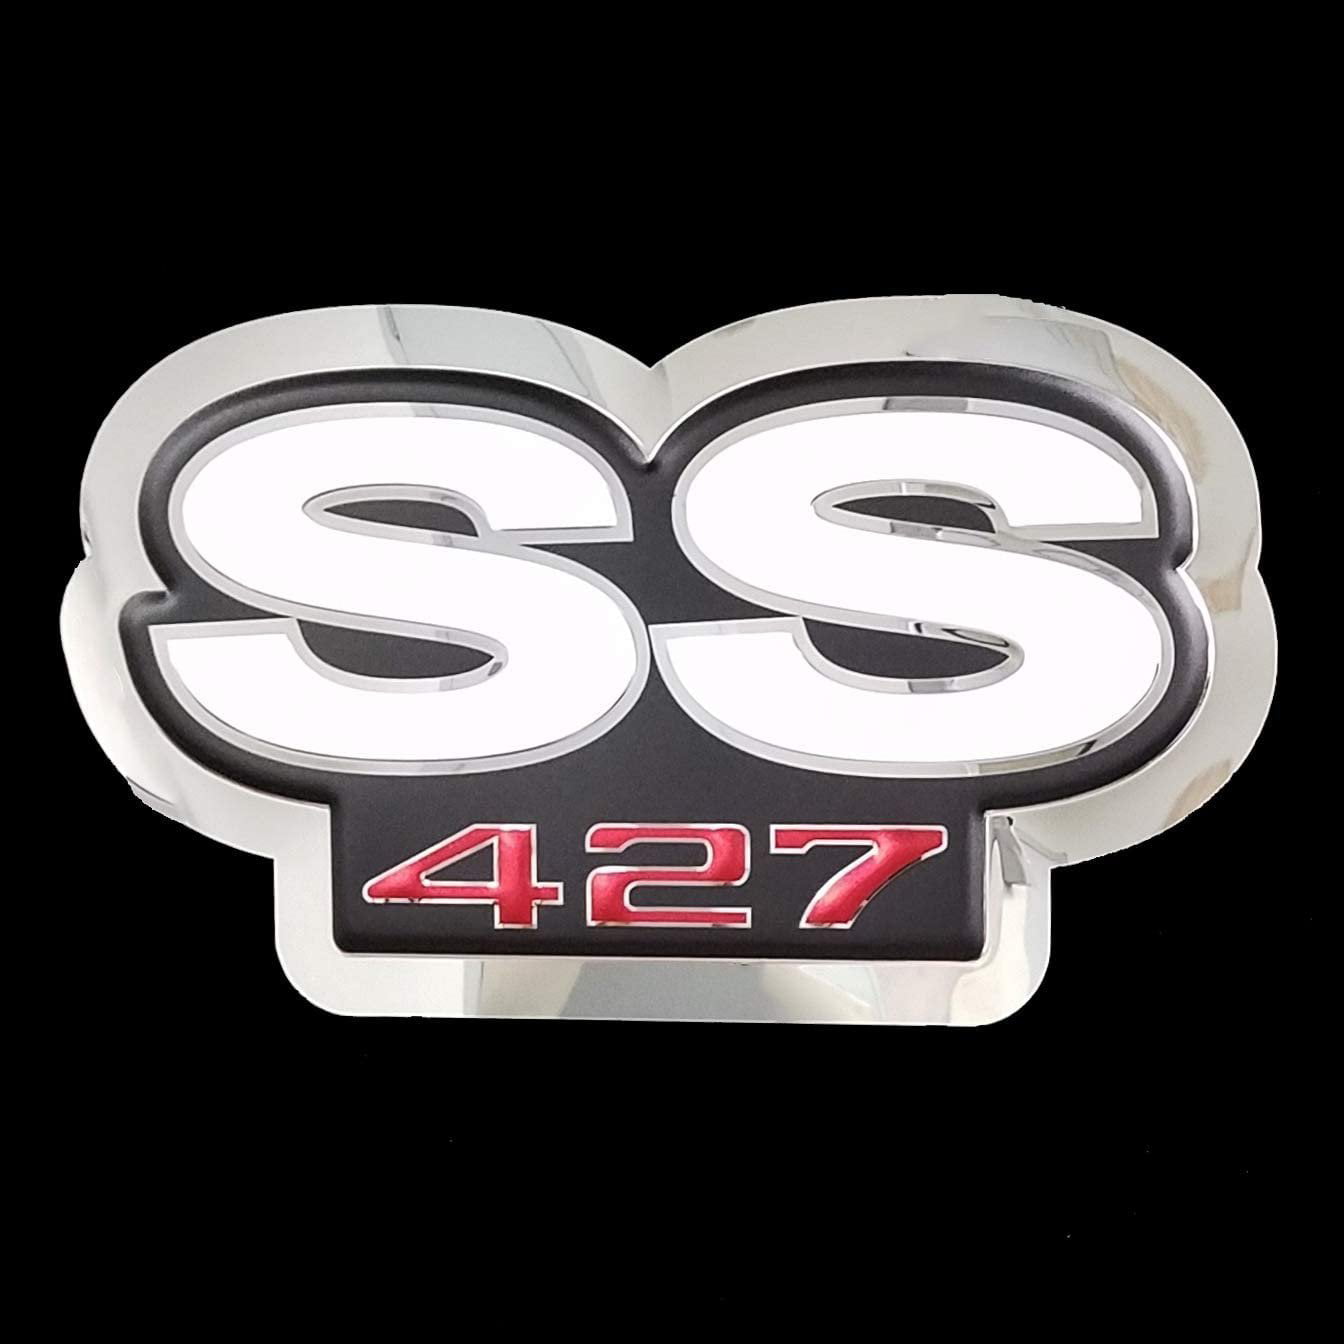 Chrome Domz Chevrolet SS 454 Badge Chrome Sign Metal Sign 17 Inches by 15 Inches